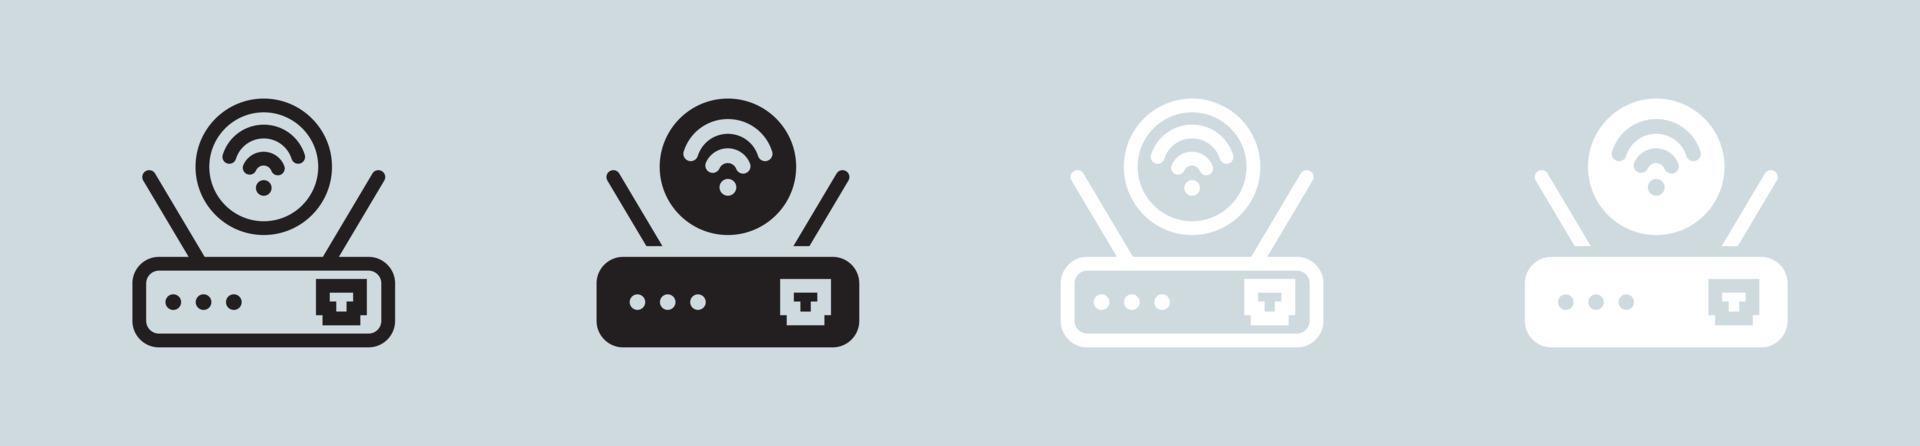 Router icon set in black and white. Network connection signs vector illustration.